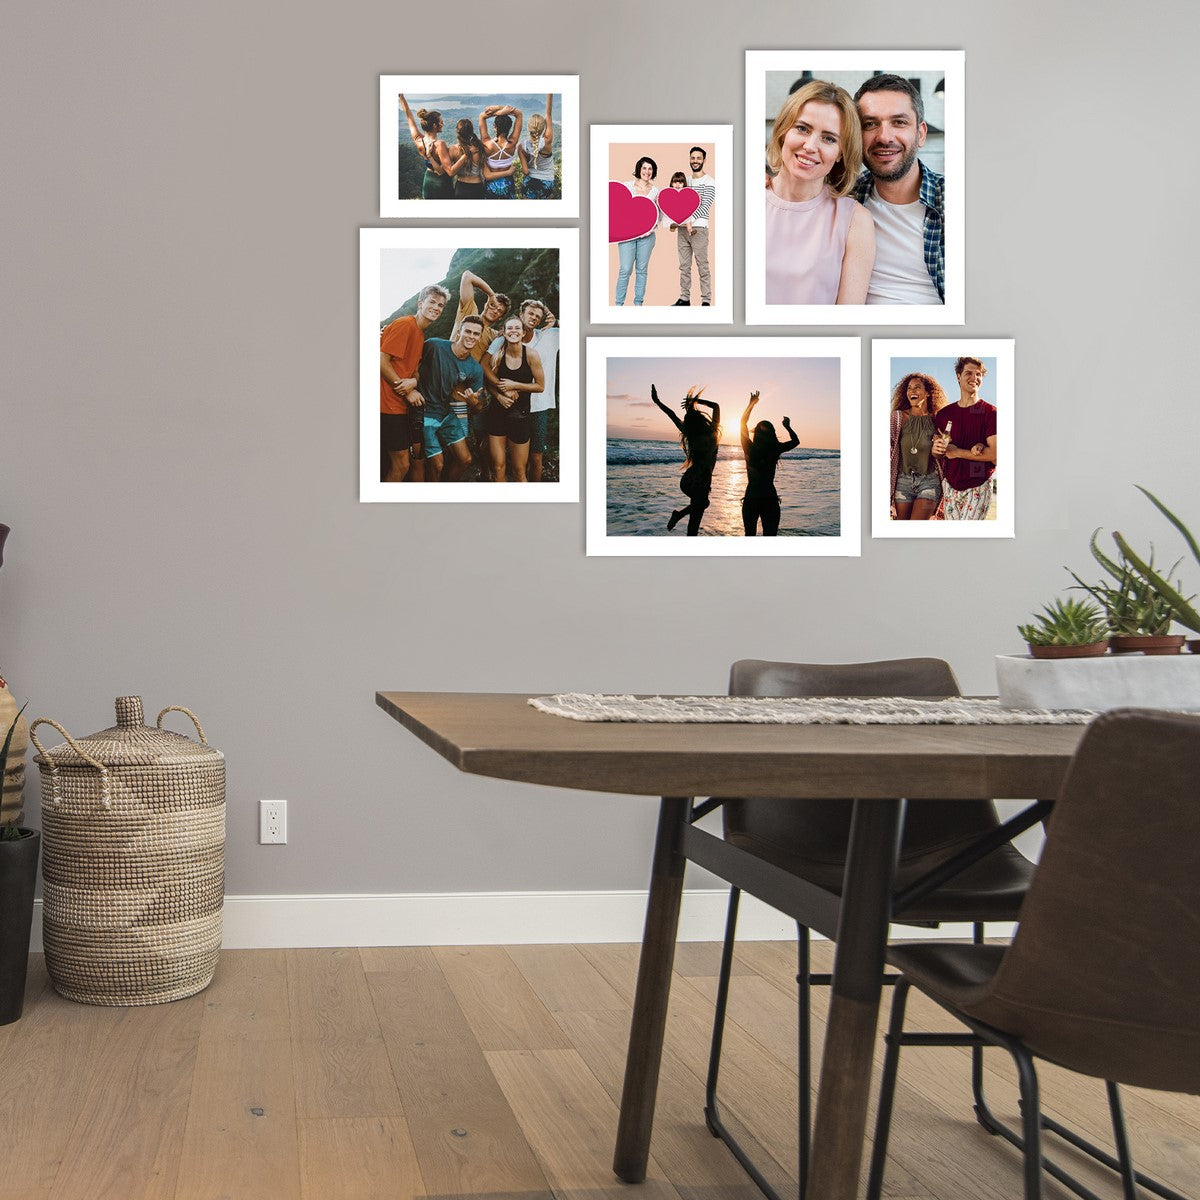 Memory Wall Collage Photo Frame - Set of 6 Photo Frames for 3 Photos of 5"x7", 3 Photos of 8"x10" 2